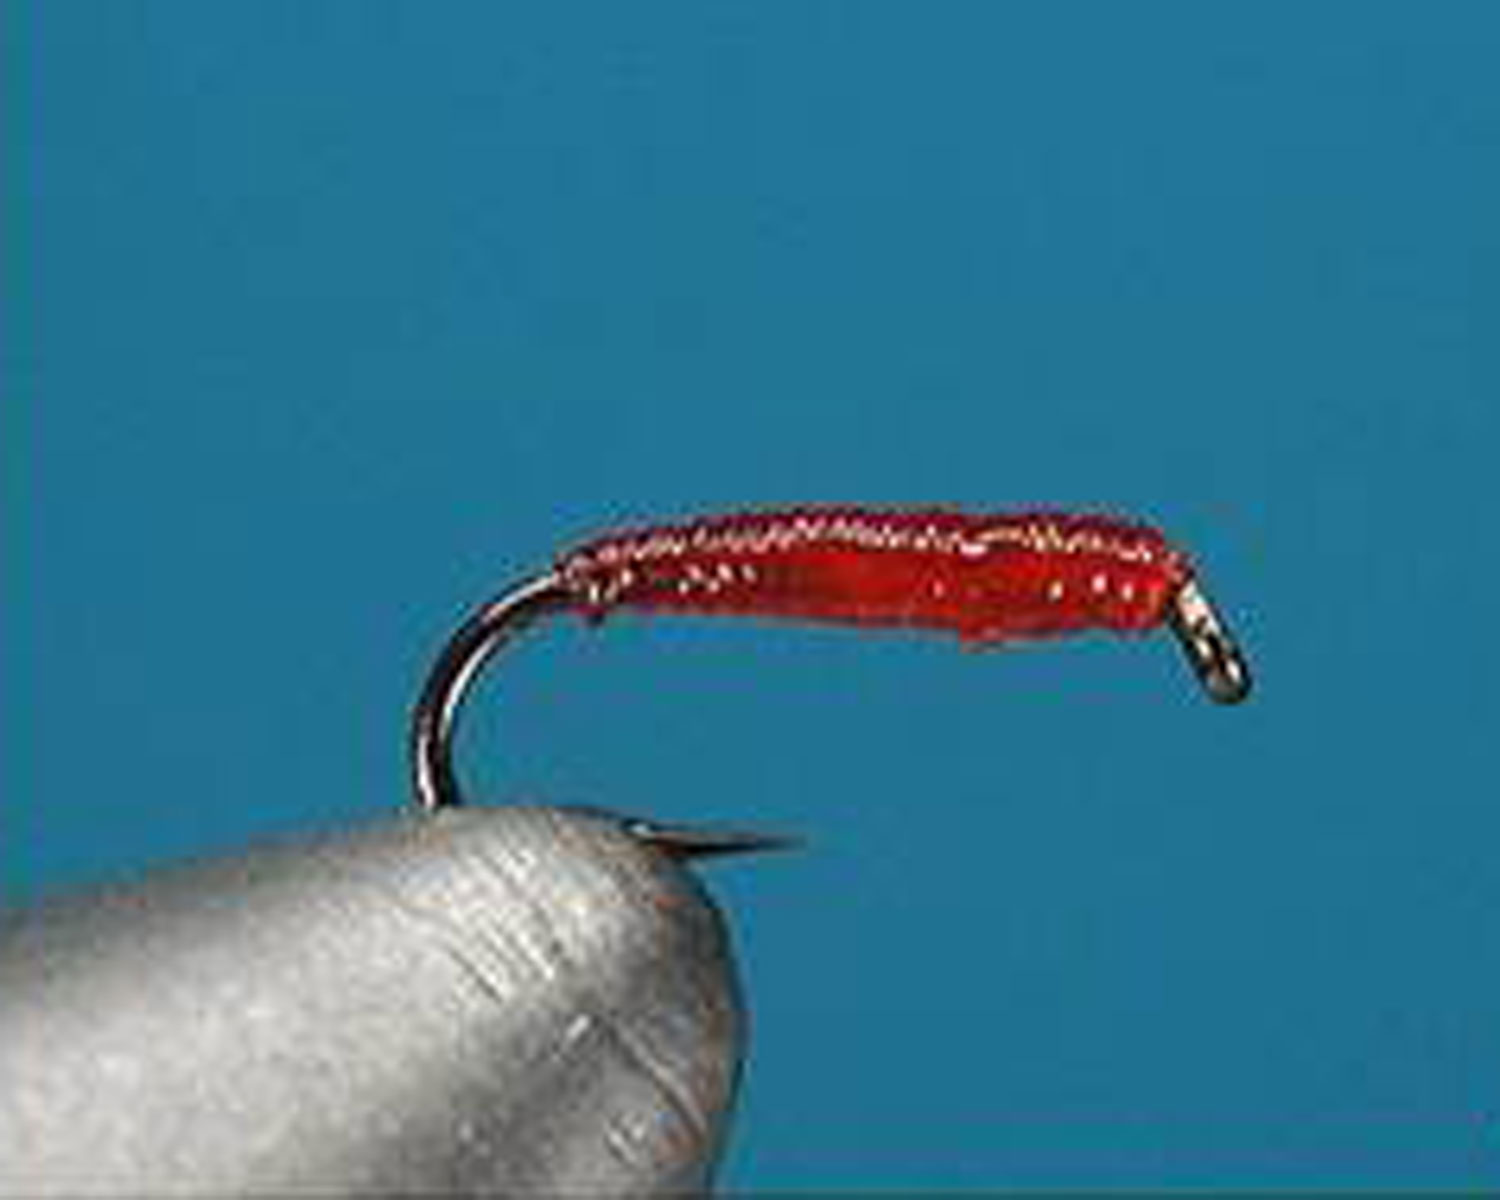 “Too simple bloodworm”